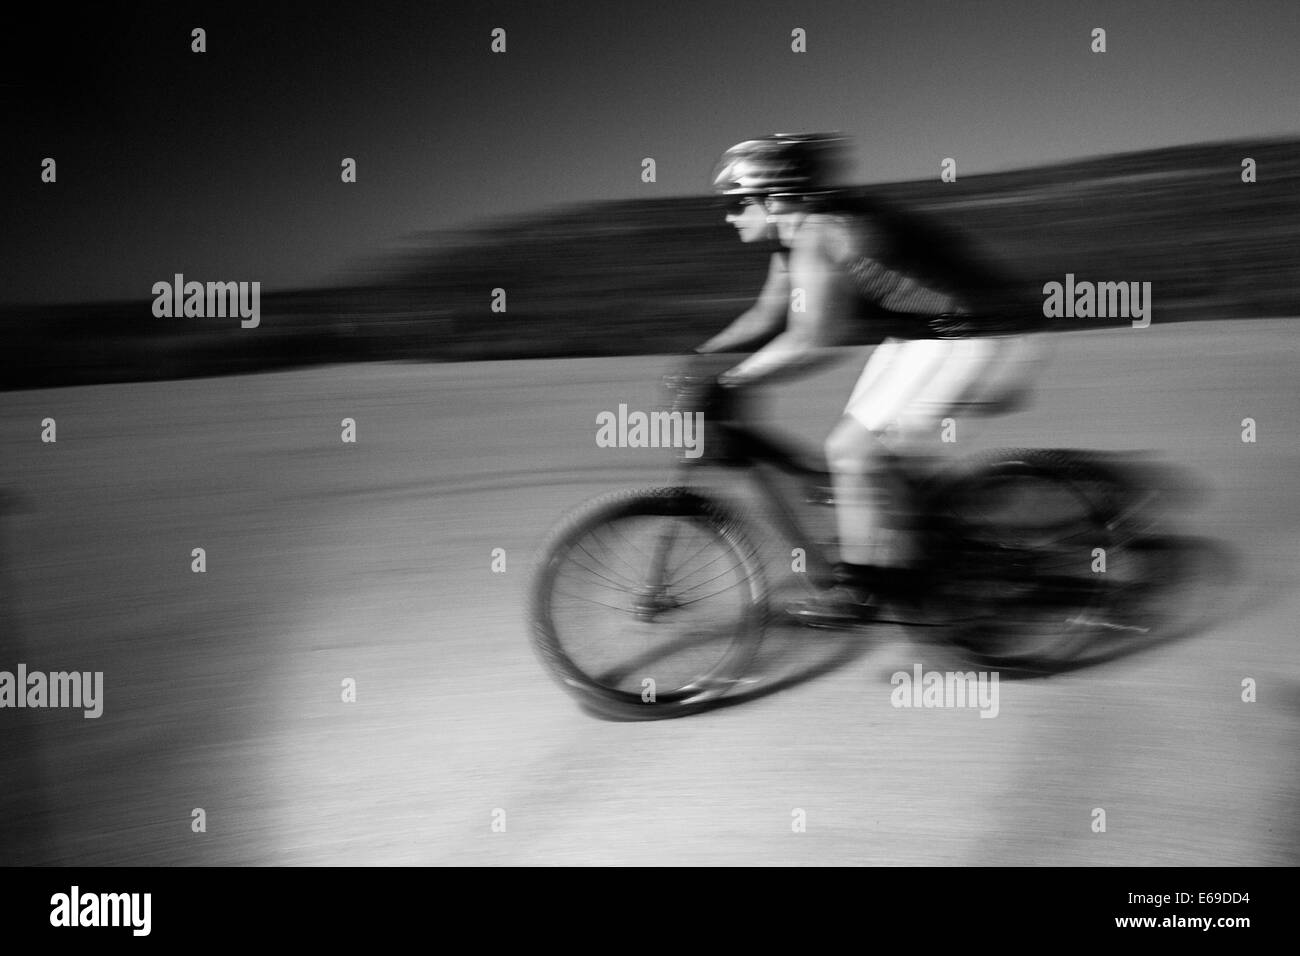 Woman riding mountain bike in desert Banque D'Images